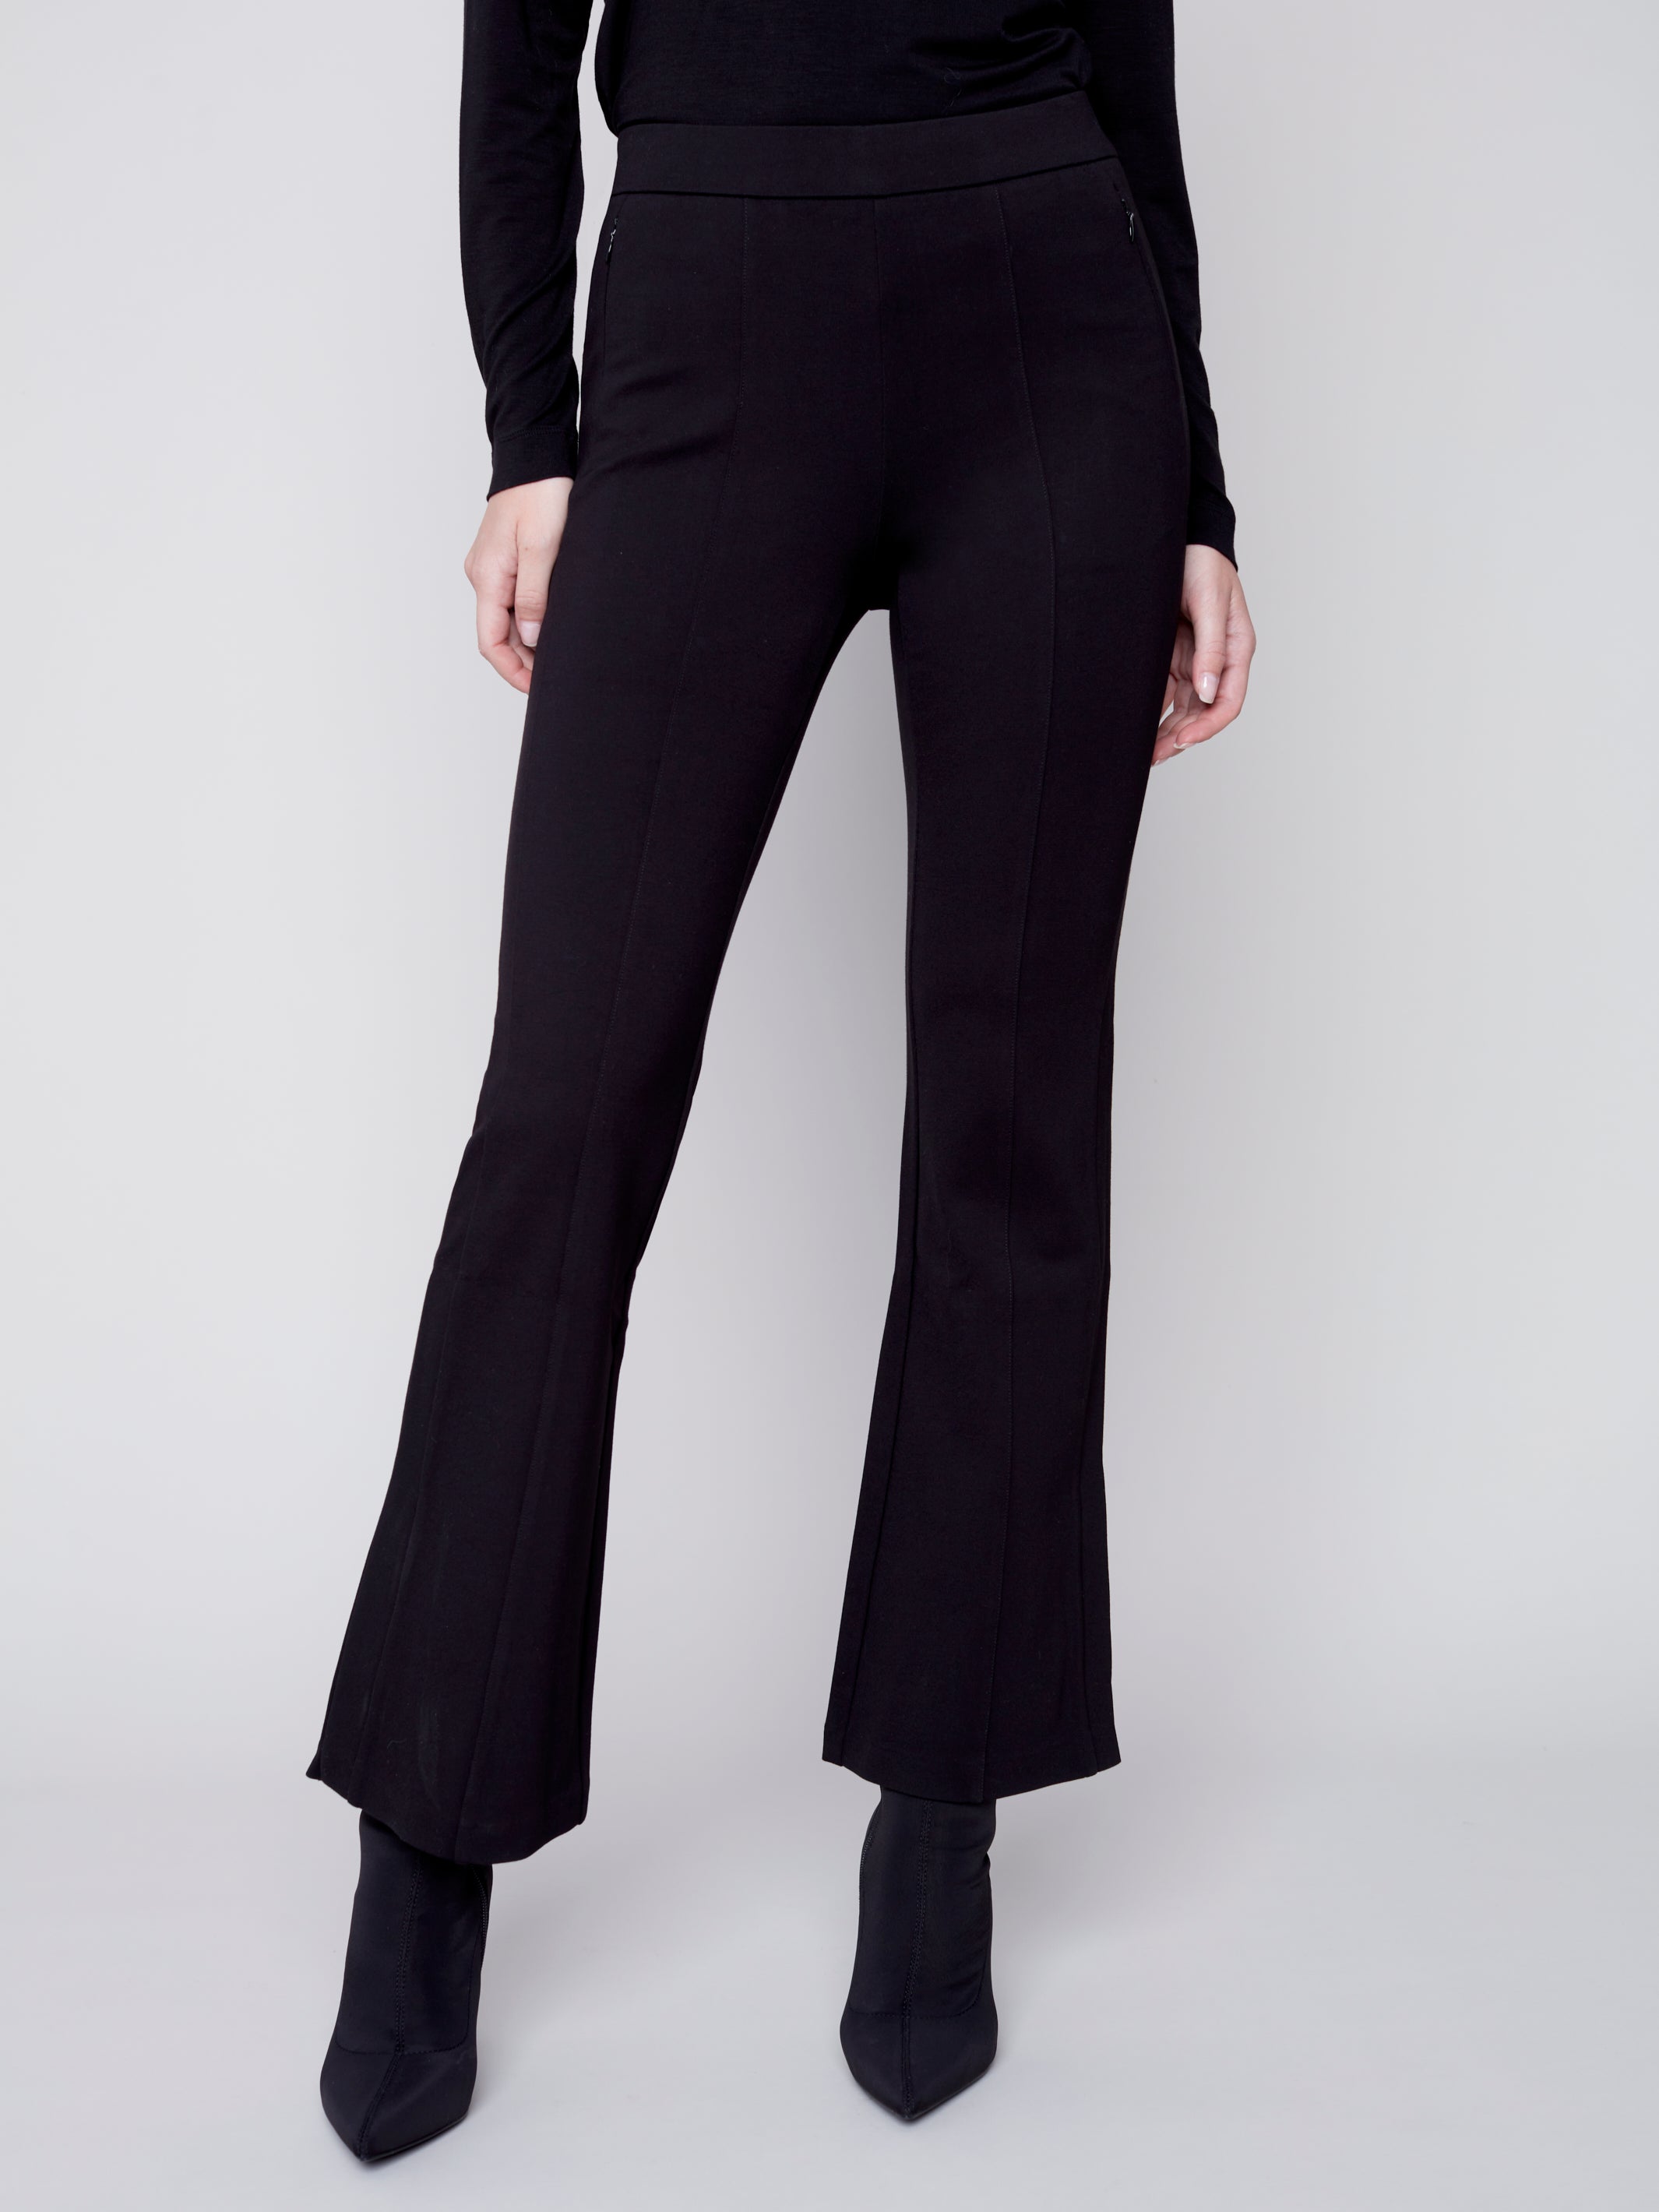 Best Ribbed Trousers: Good American Plated Rib Flare Pants, 7 Stylish  Pairs of Trousers You Can Wear All Day Without Wrinkling